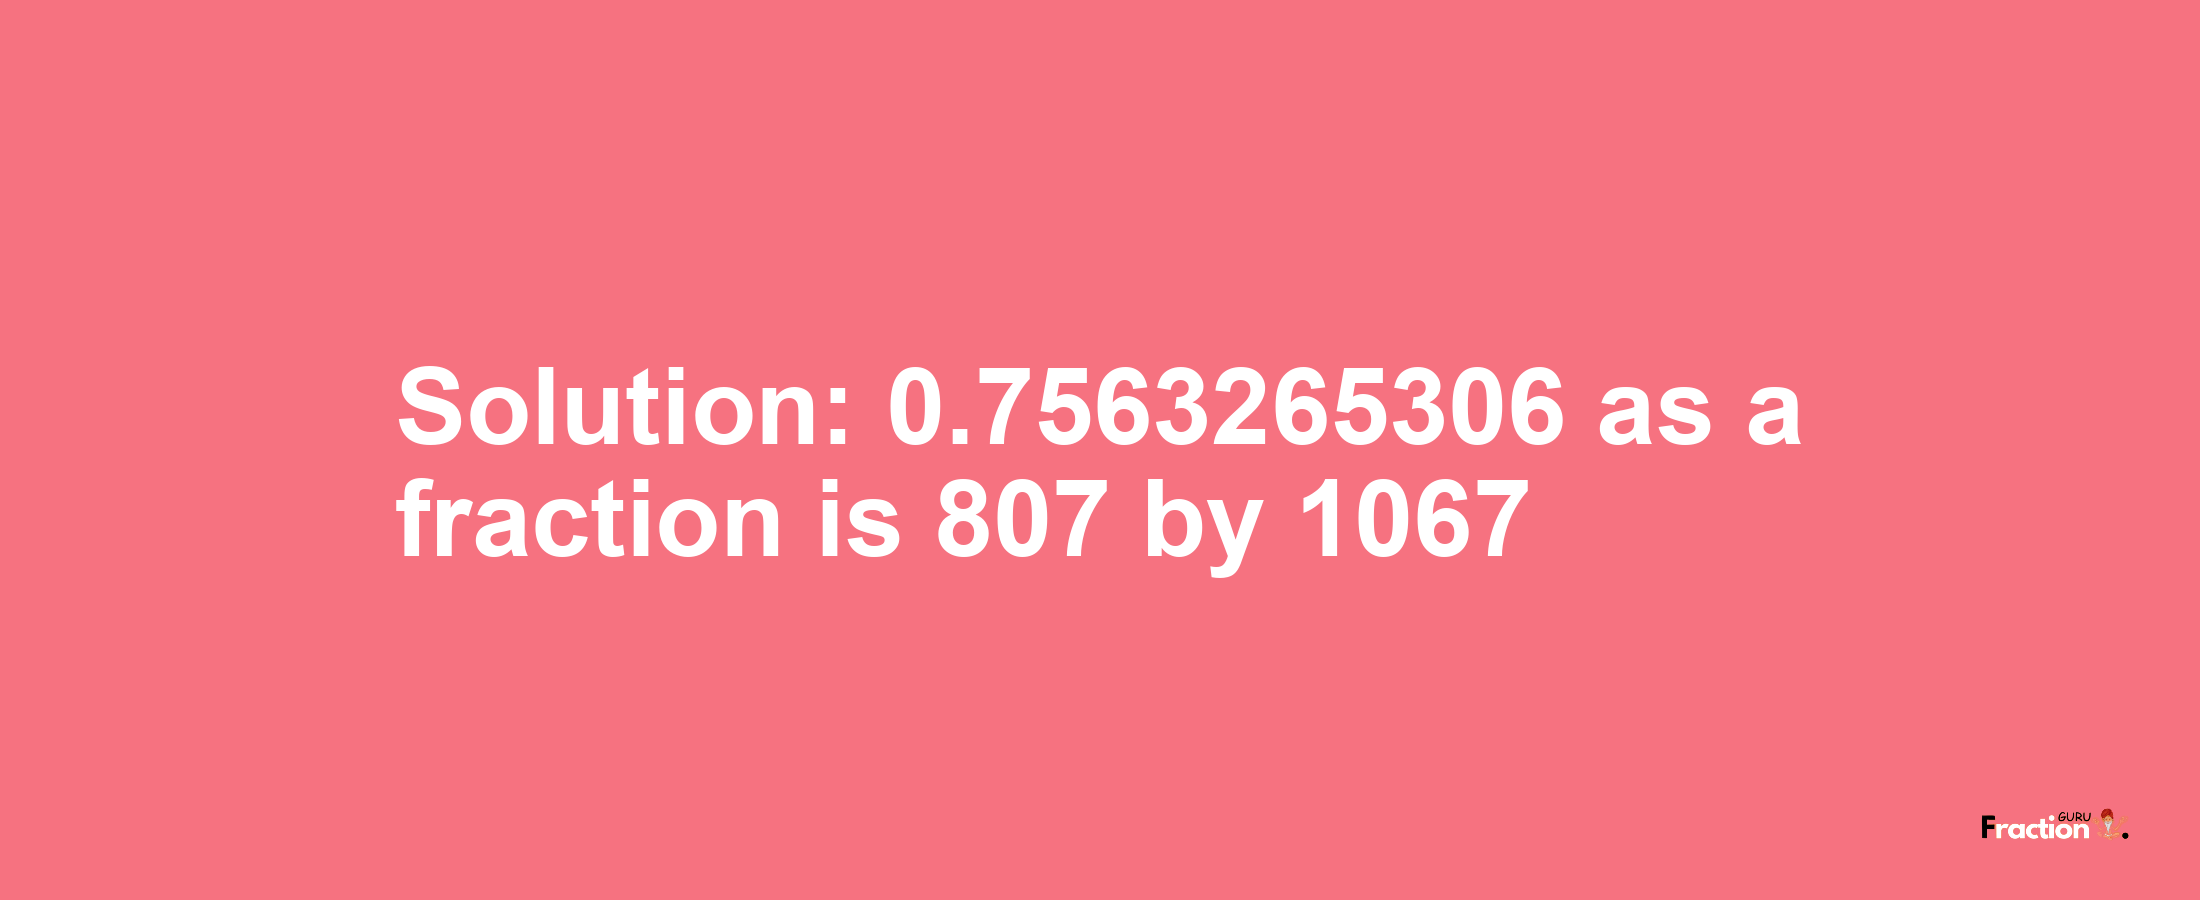 Solution:0.7563265306 as a fraction is 807/1067